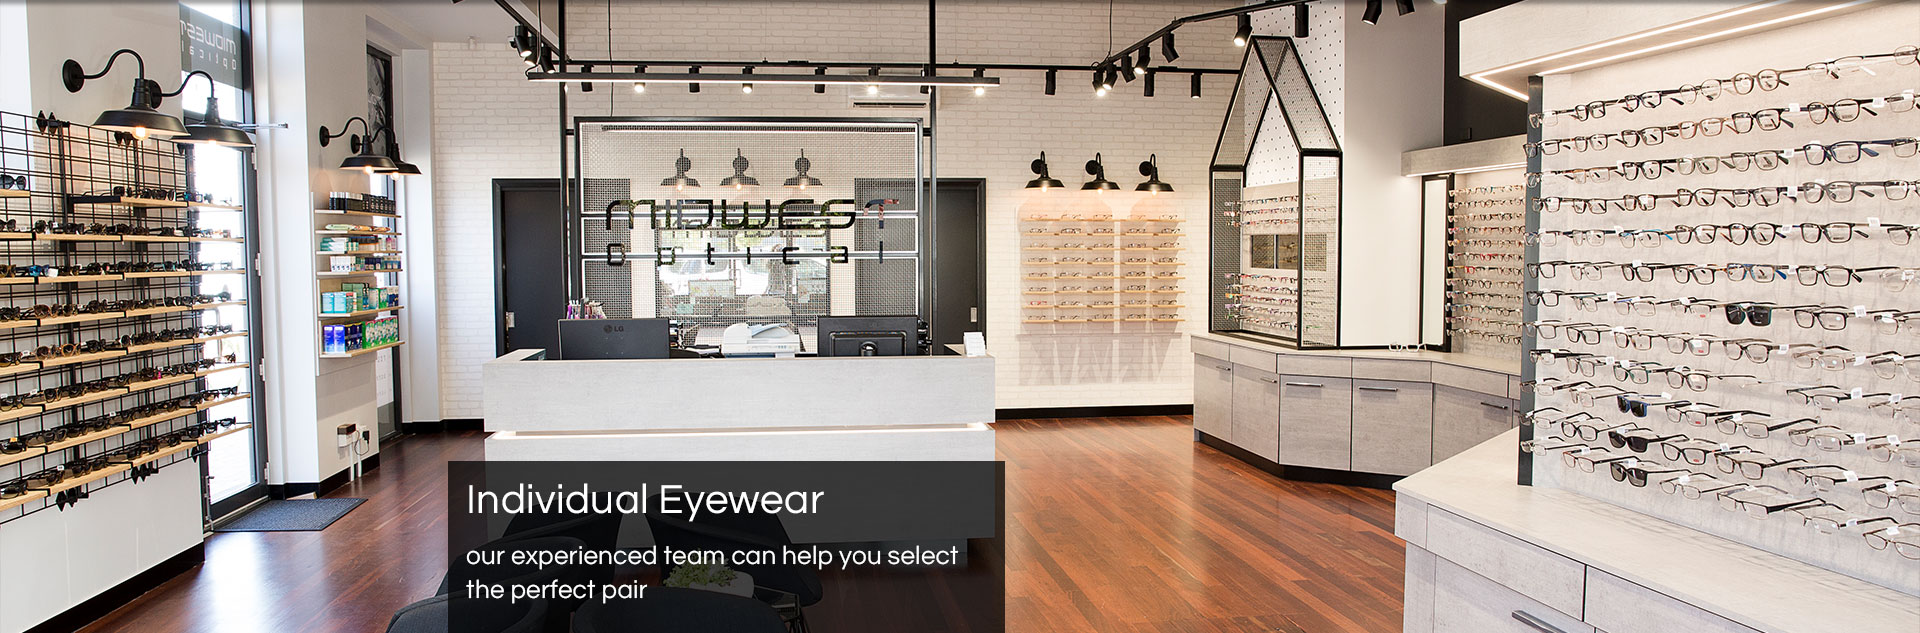 Individual eyewear - let our experienced team help you select the perfect pair